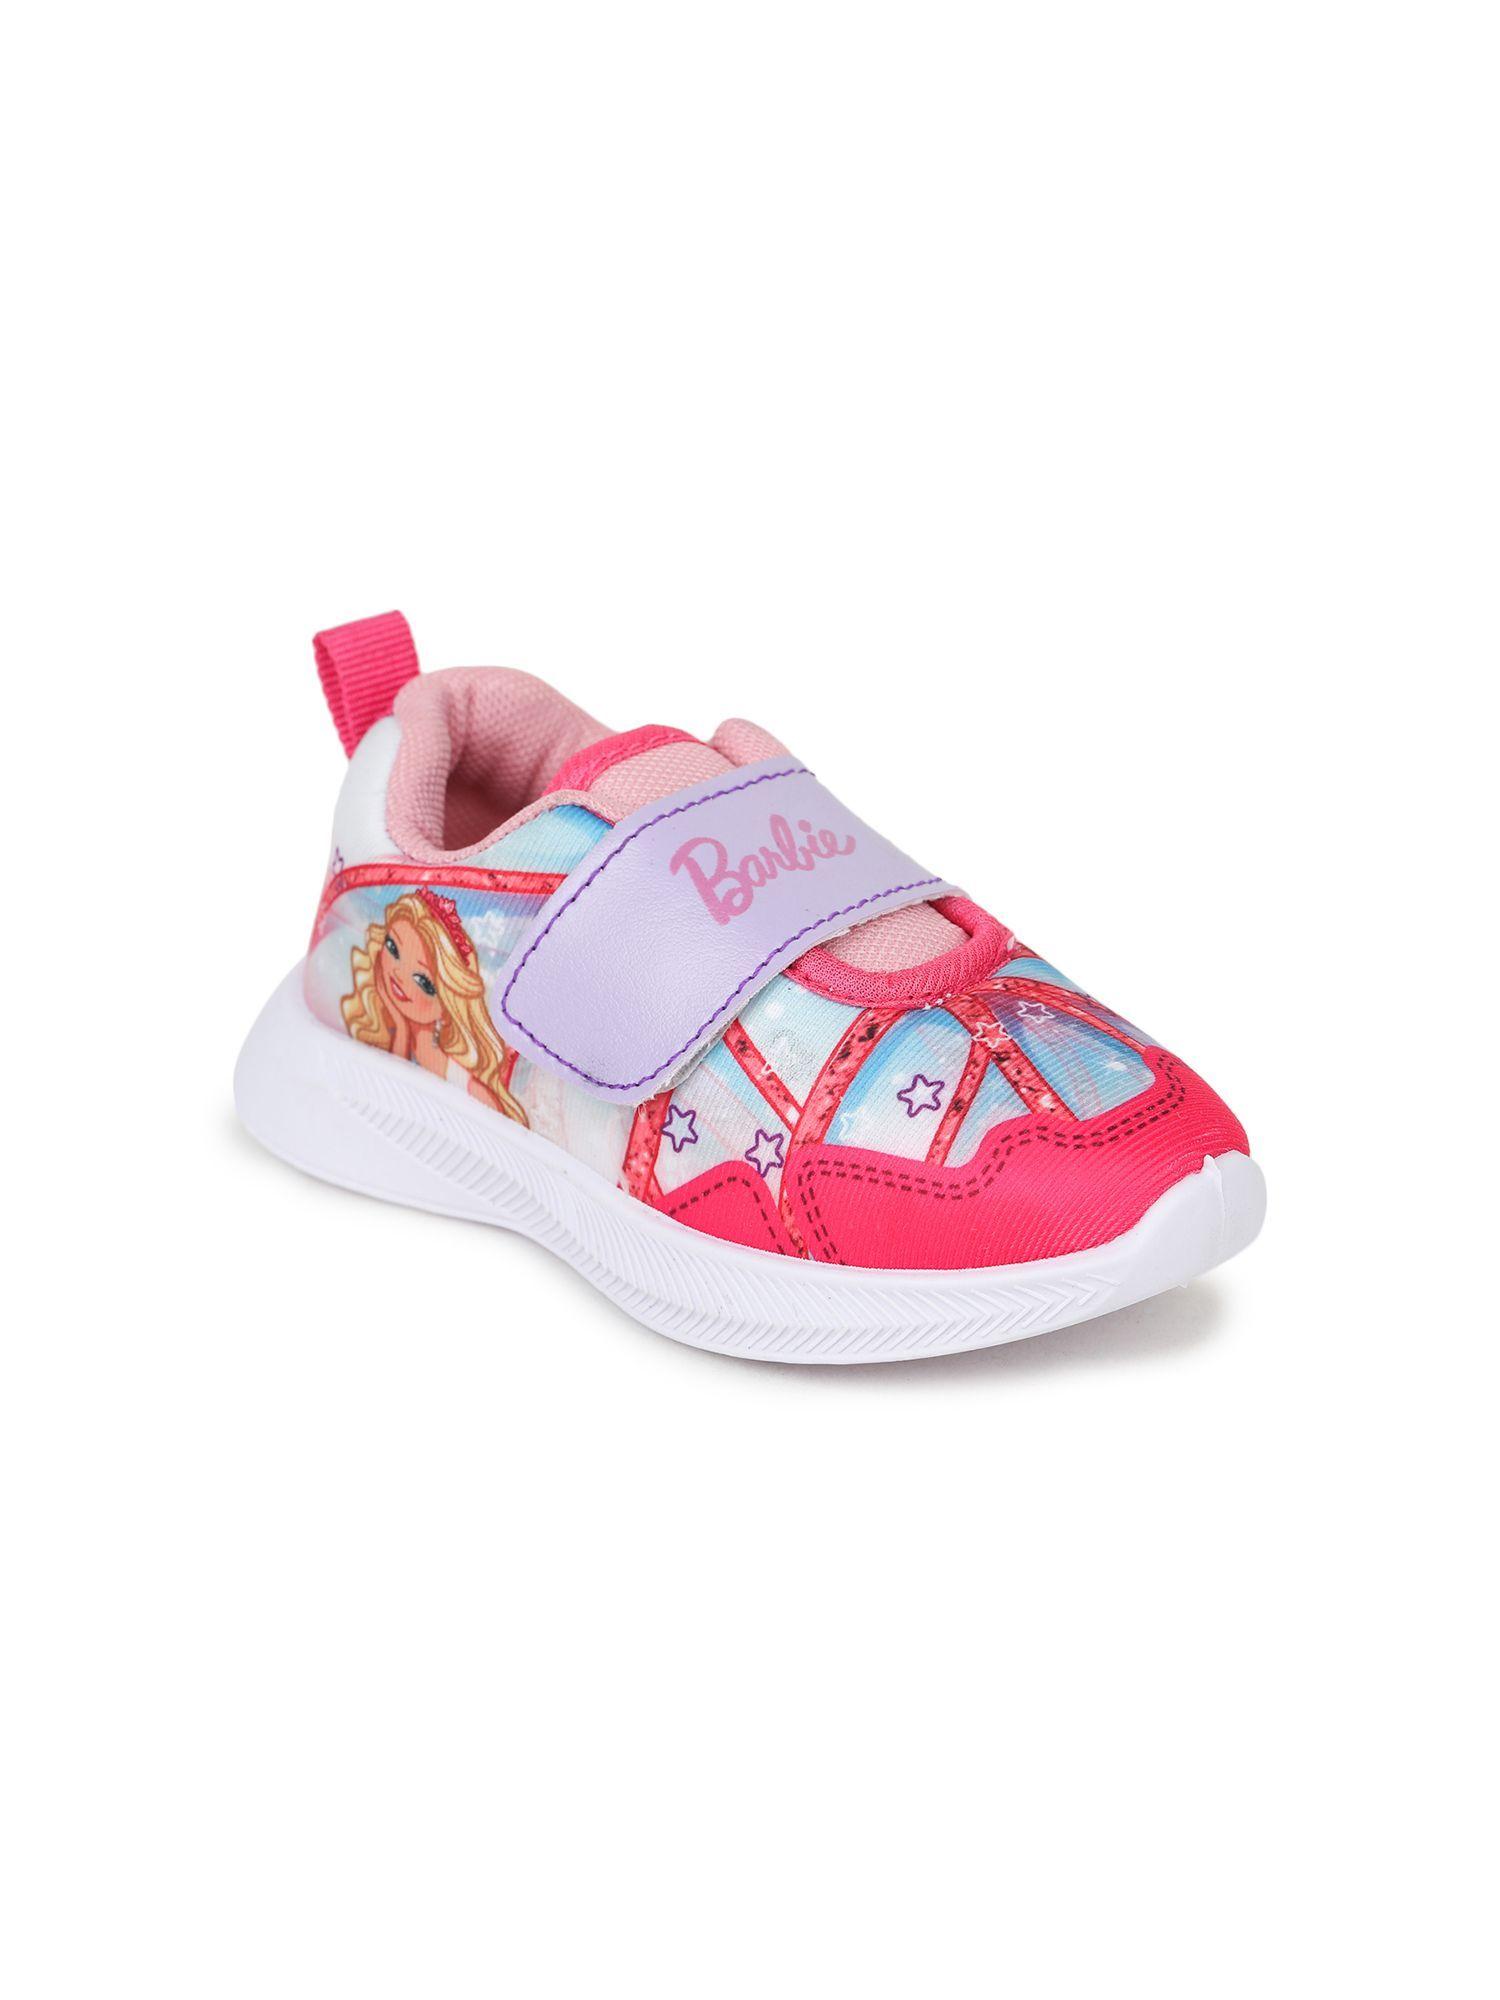 barbie-kids-girls-pink-casual-shoes